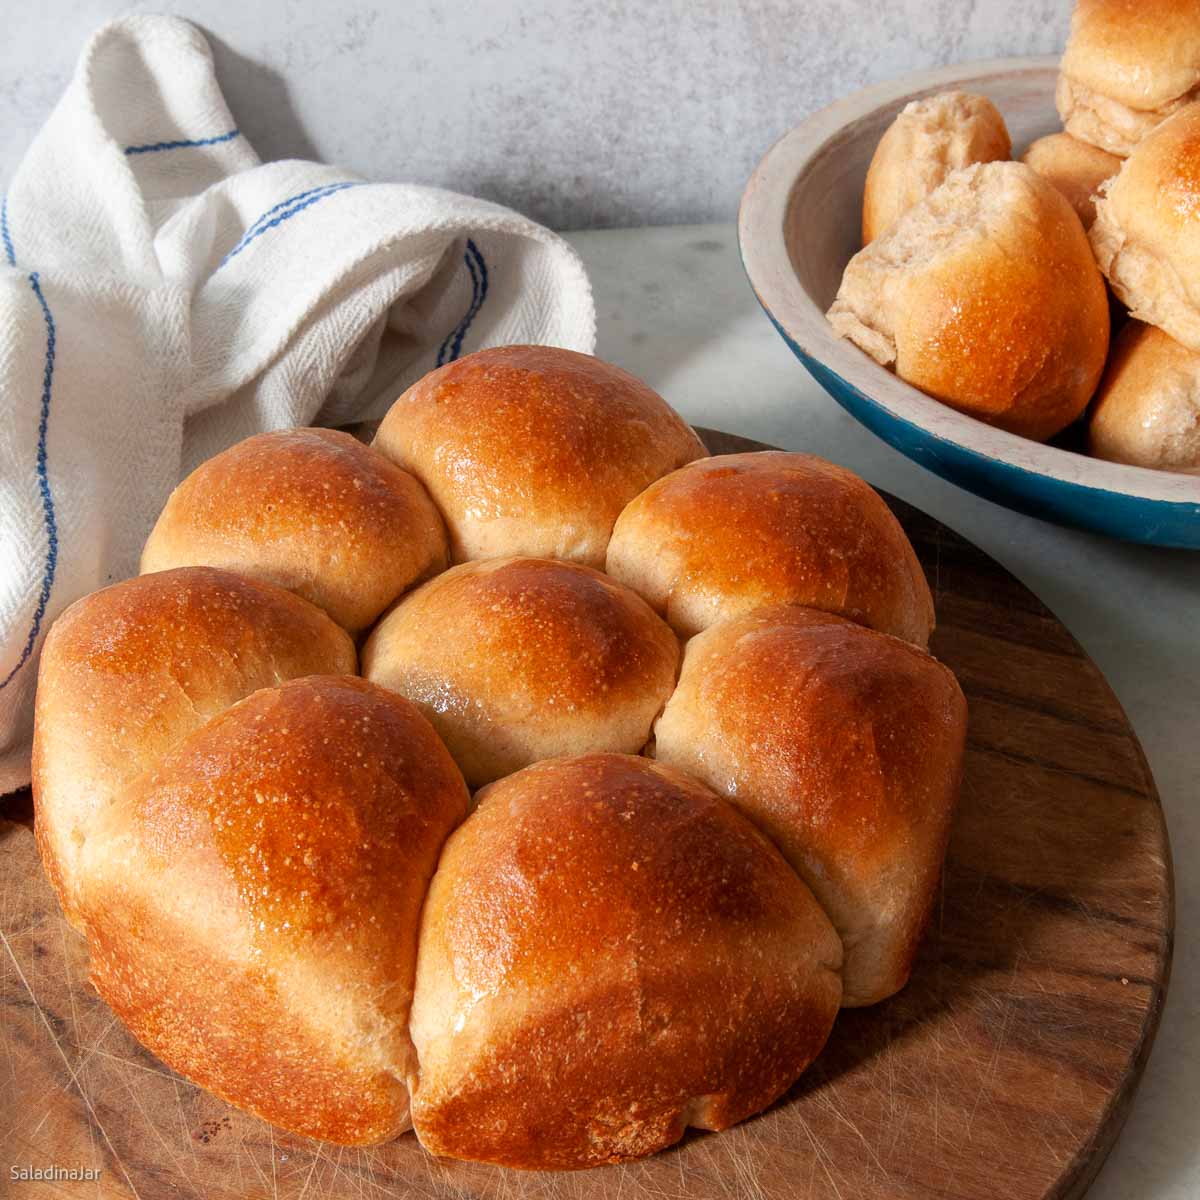 baked whole wheat rolls on a cutting board.